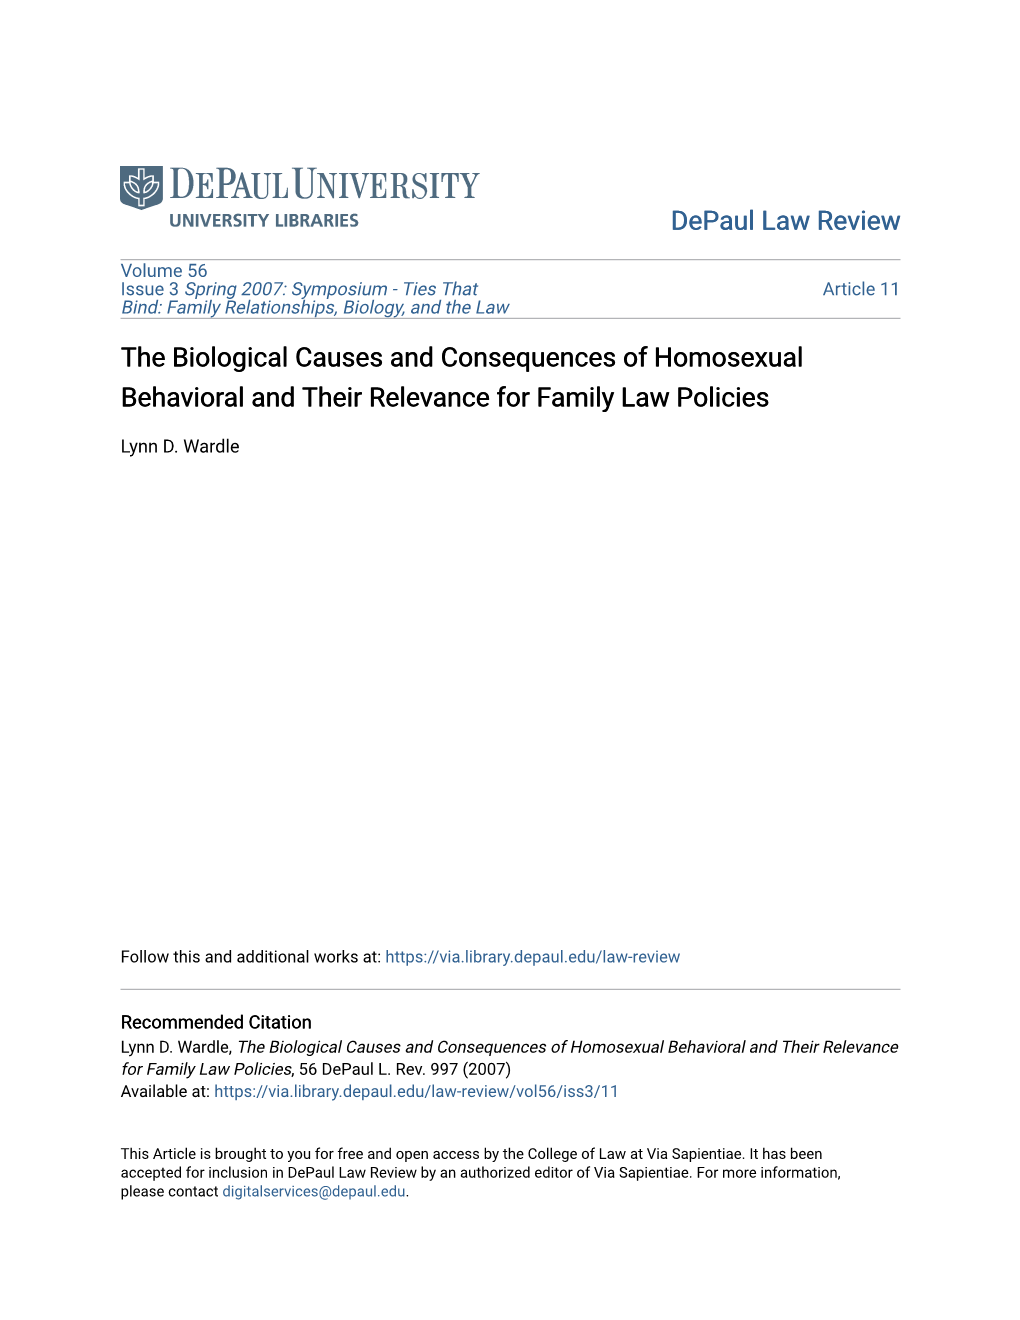 The Biological Causes and Consequences of Homosexual Behavioral and Their Relevance for Family Law Policies